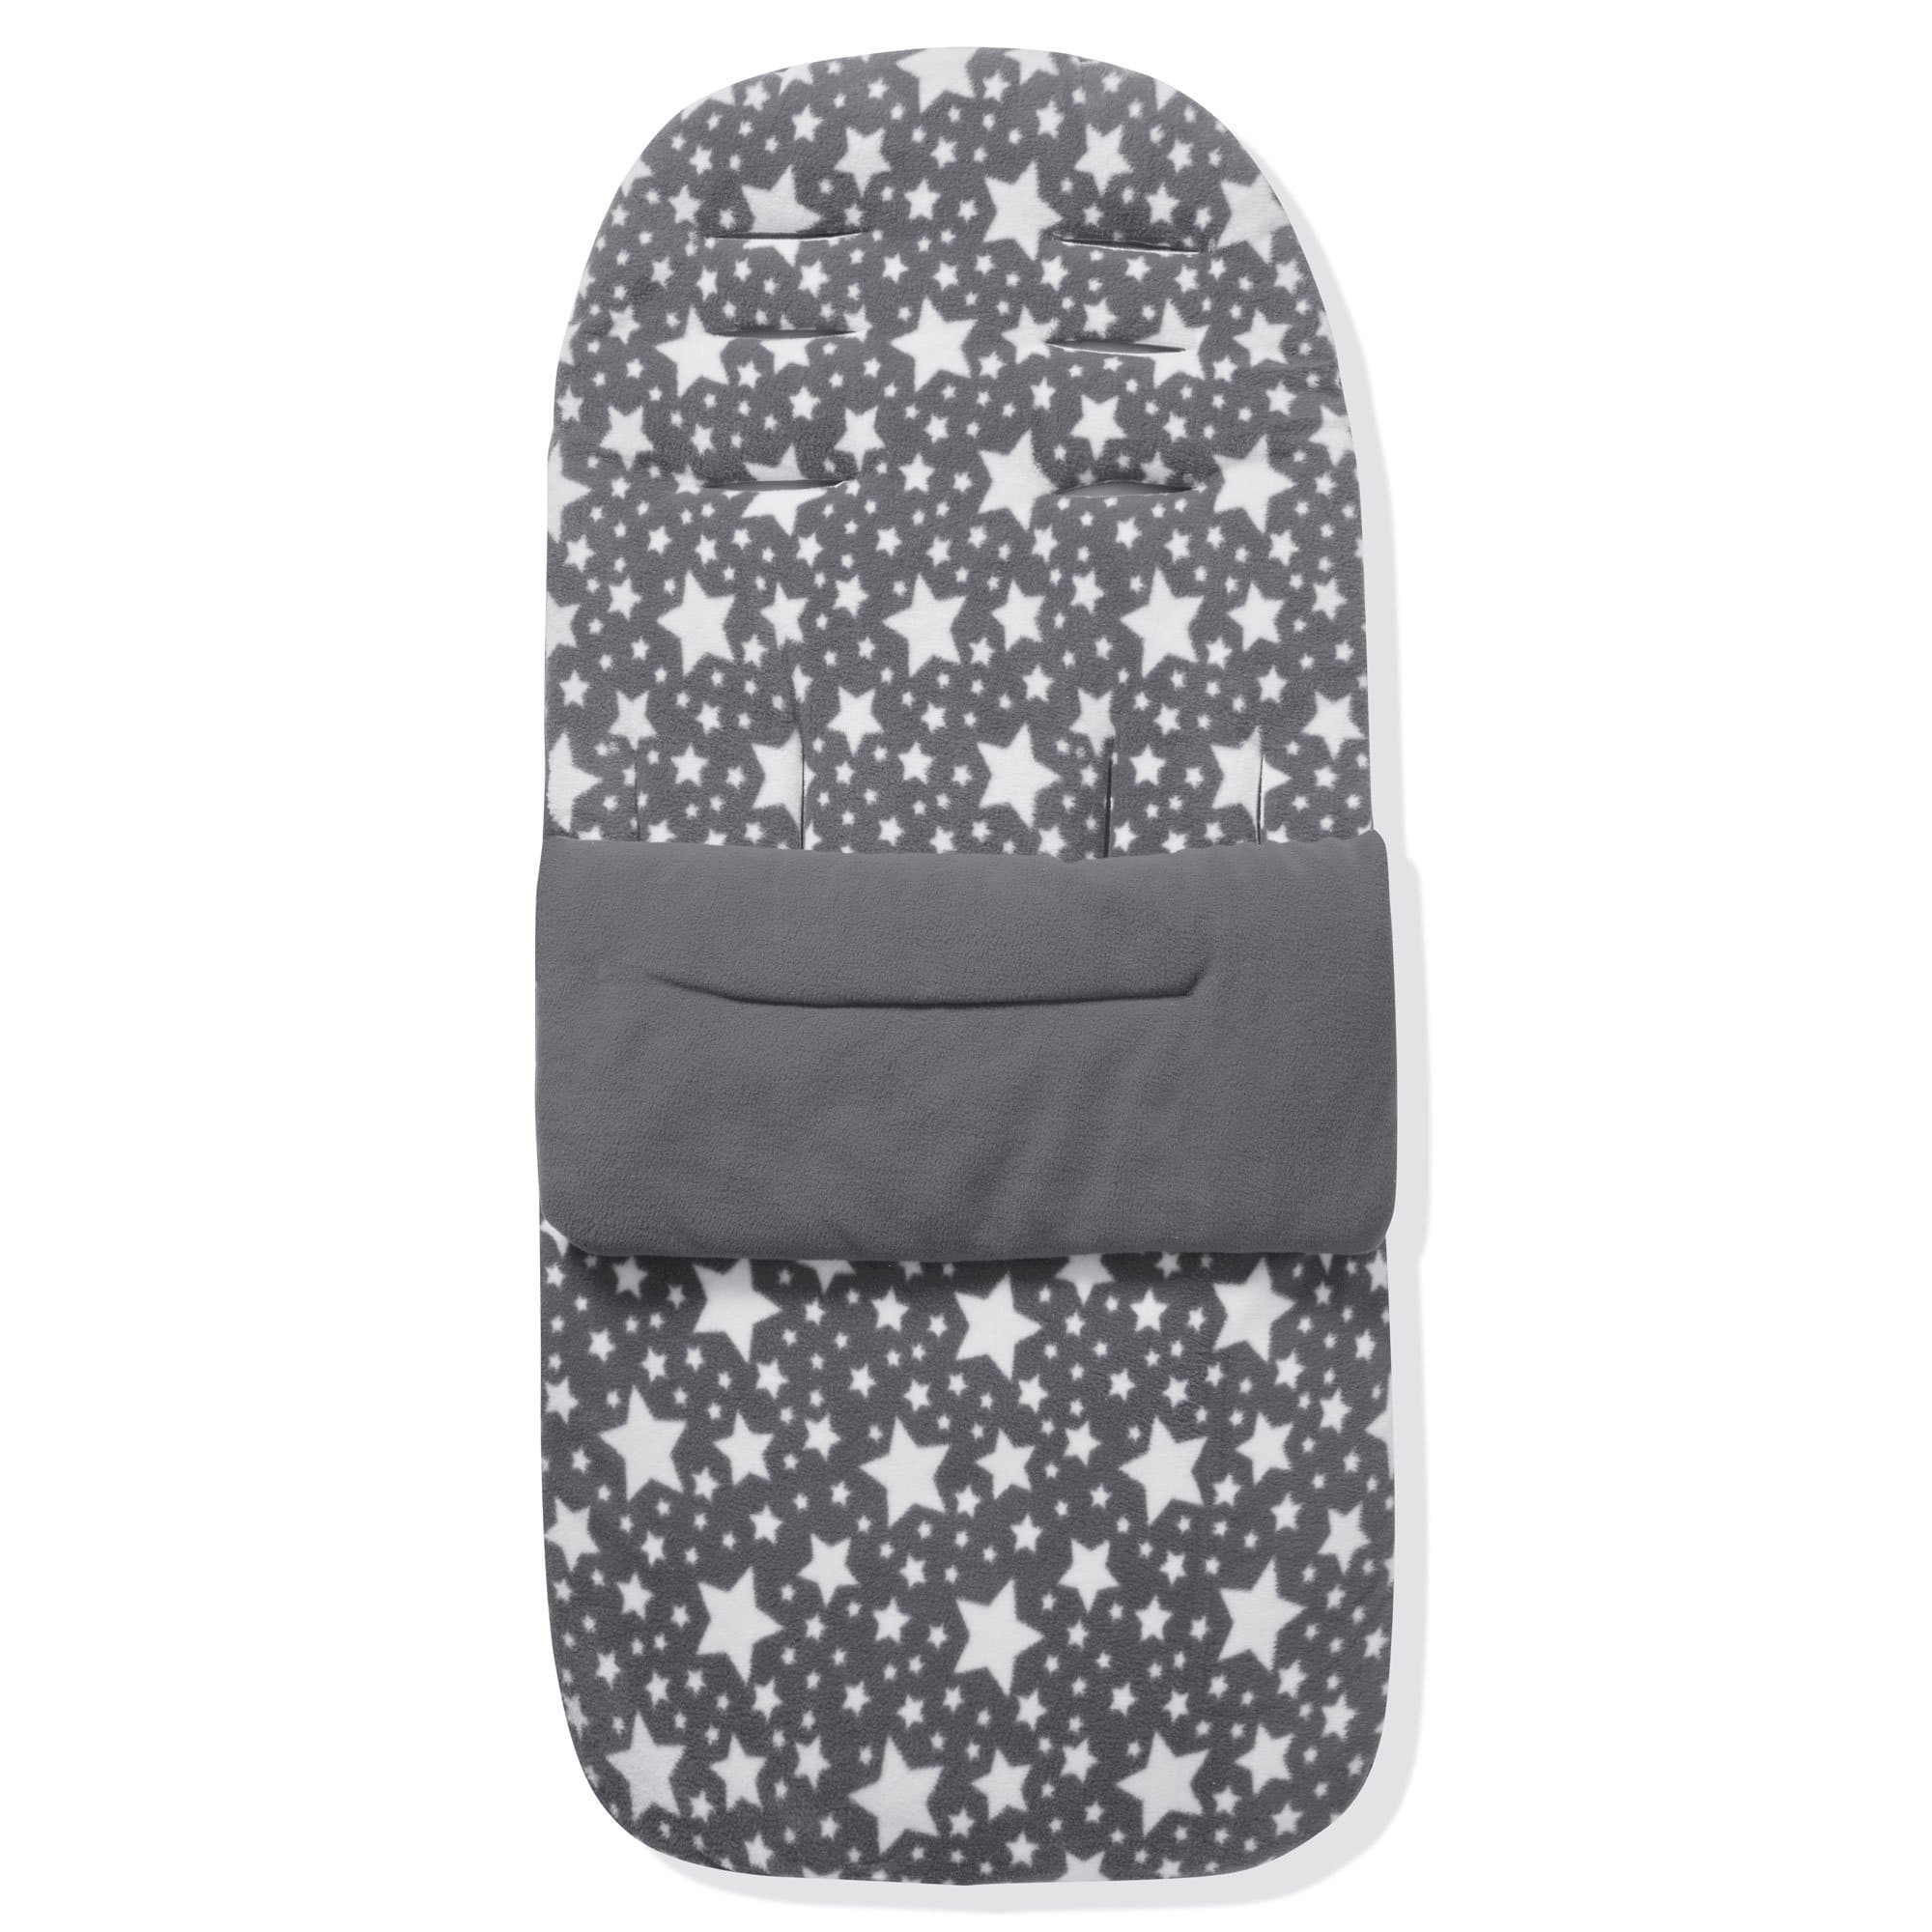 Fleece Footmuff / Cosy Toes Compatible with Kids Kargo - Grey Star / Fits All Models | For Your Little One